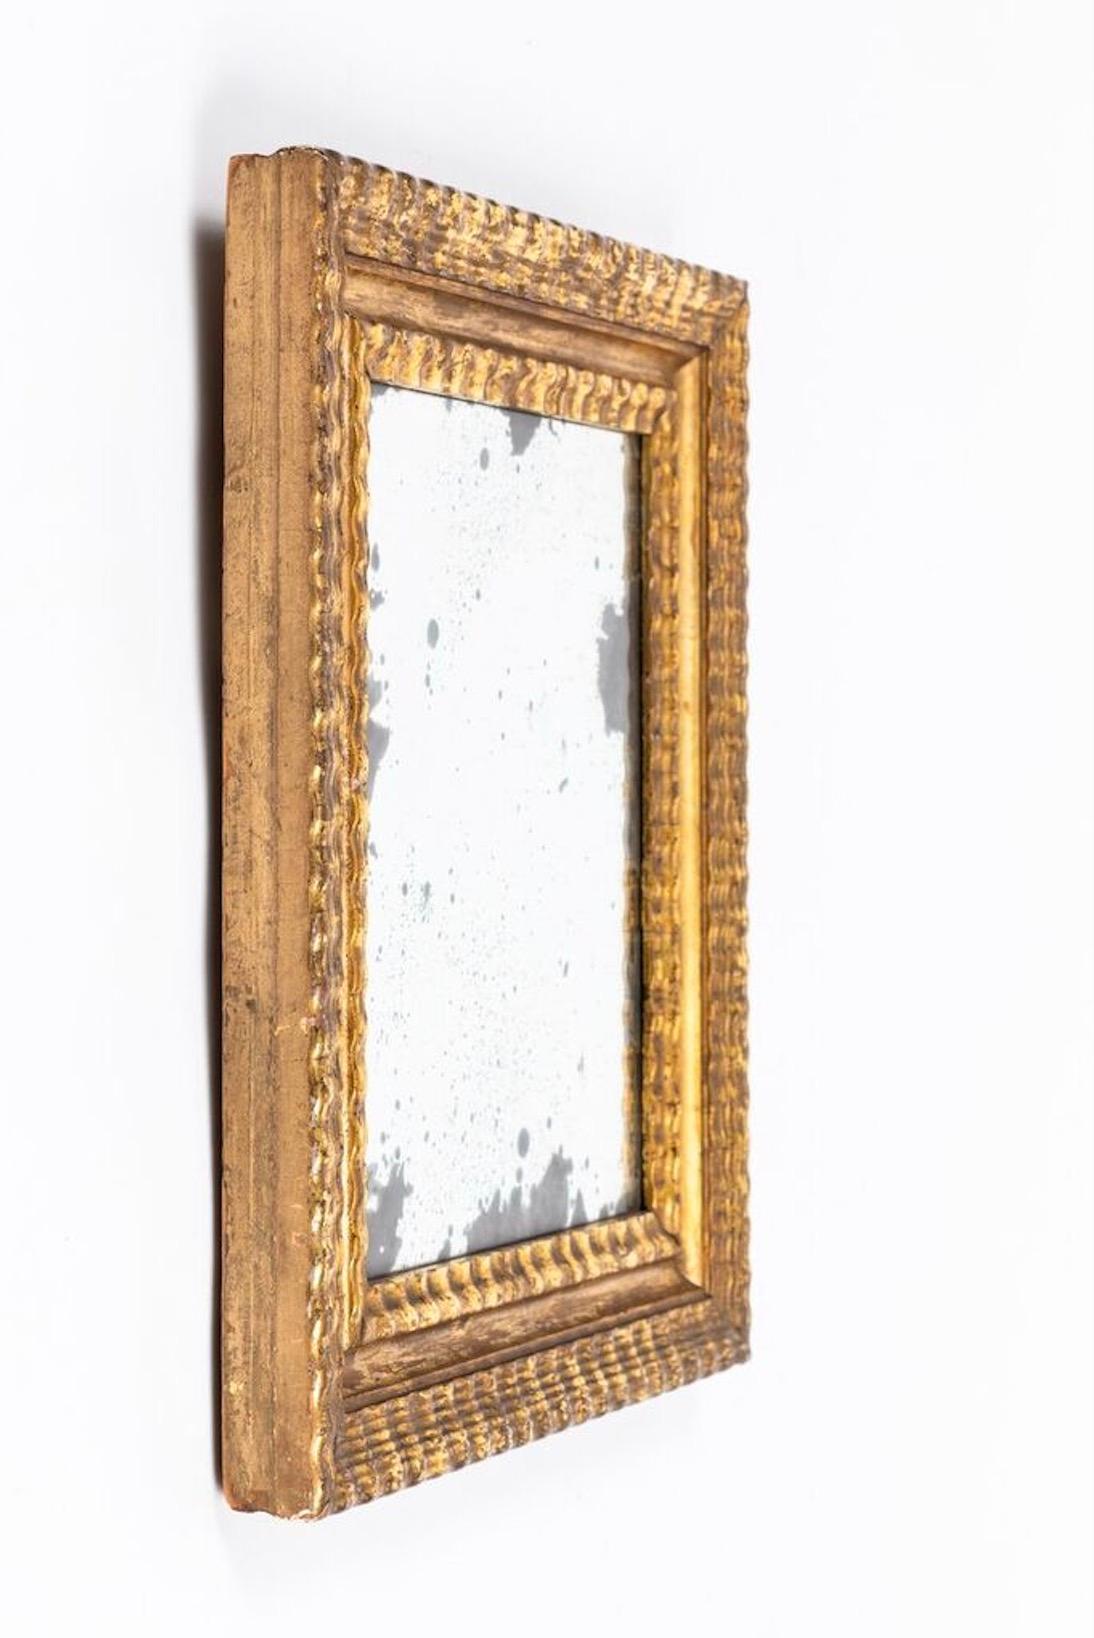 17th century Dutch Baroque mirror, with gilt frame. Rectangular small scale with textured frame. Original glass with natural antiqued appearance.

 